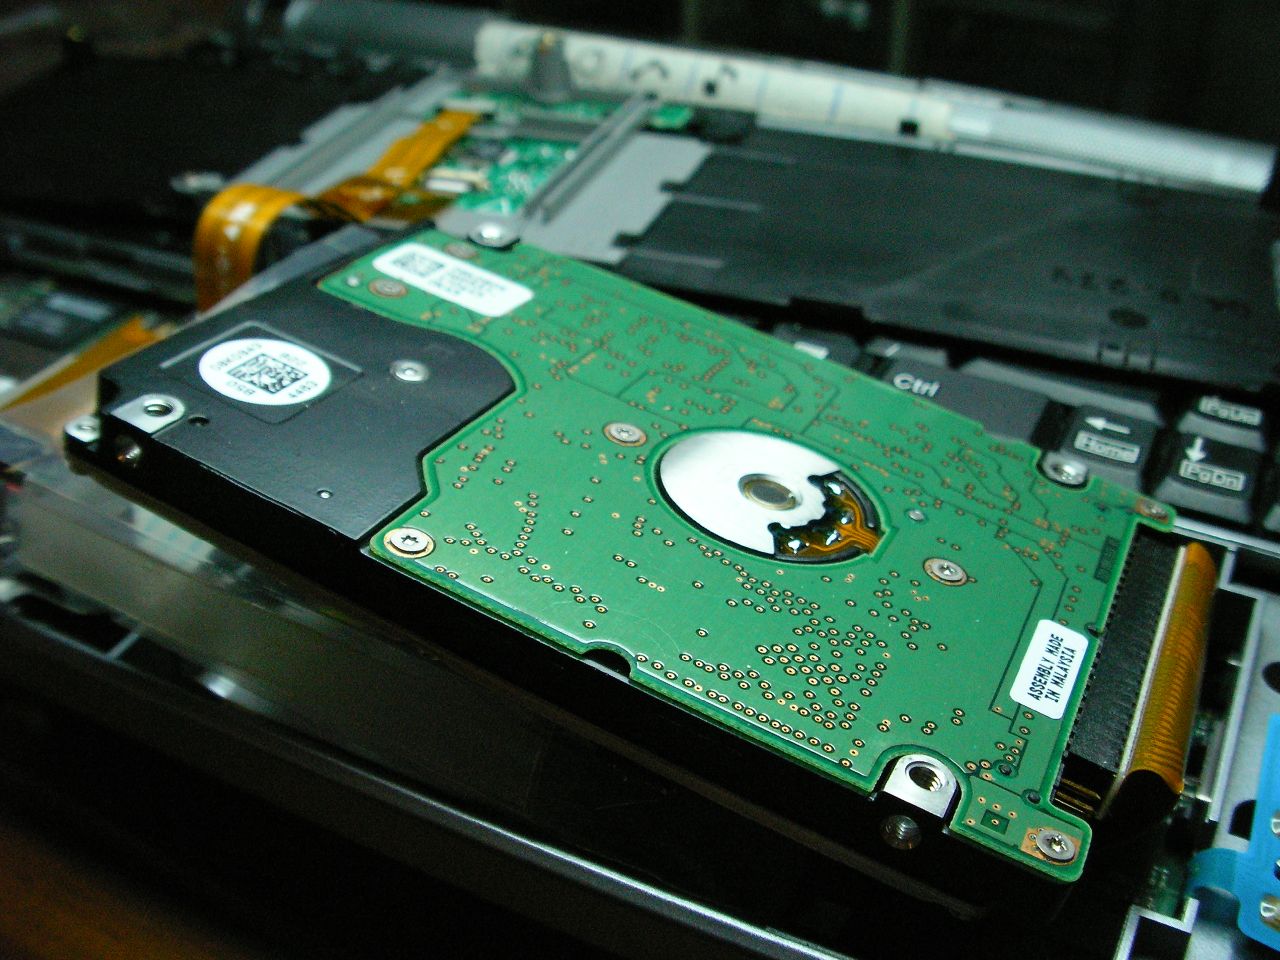 the hard drive tray is being dismantled